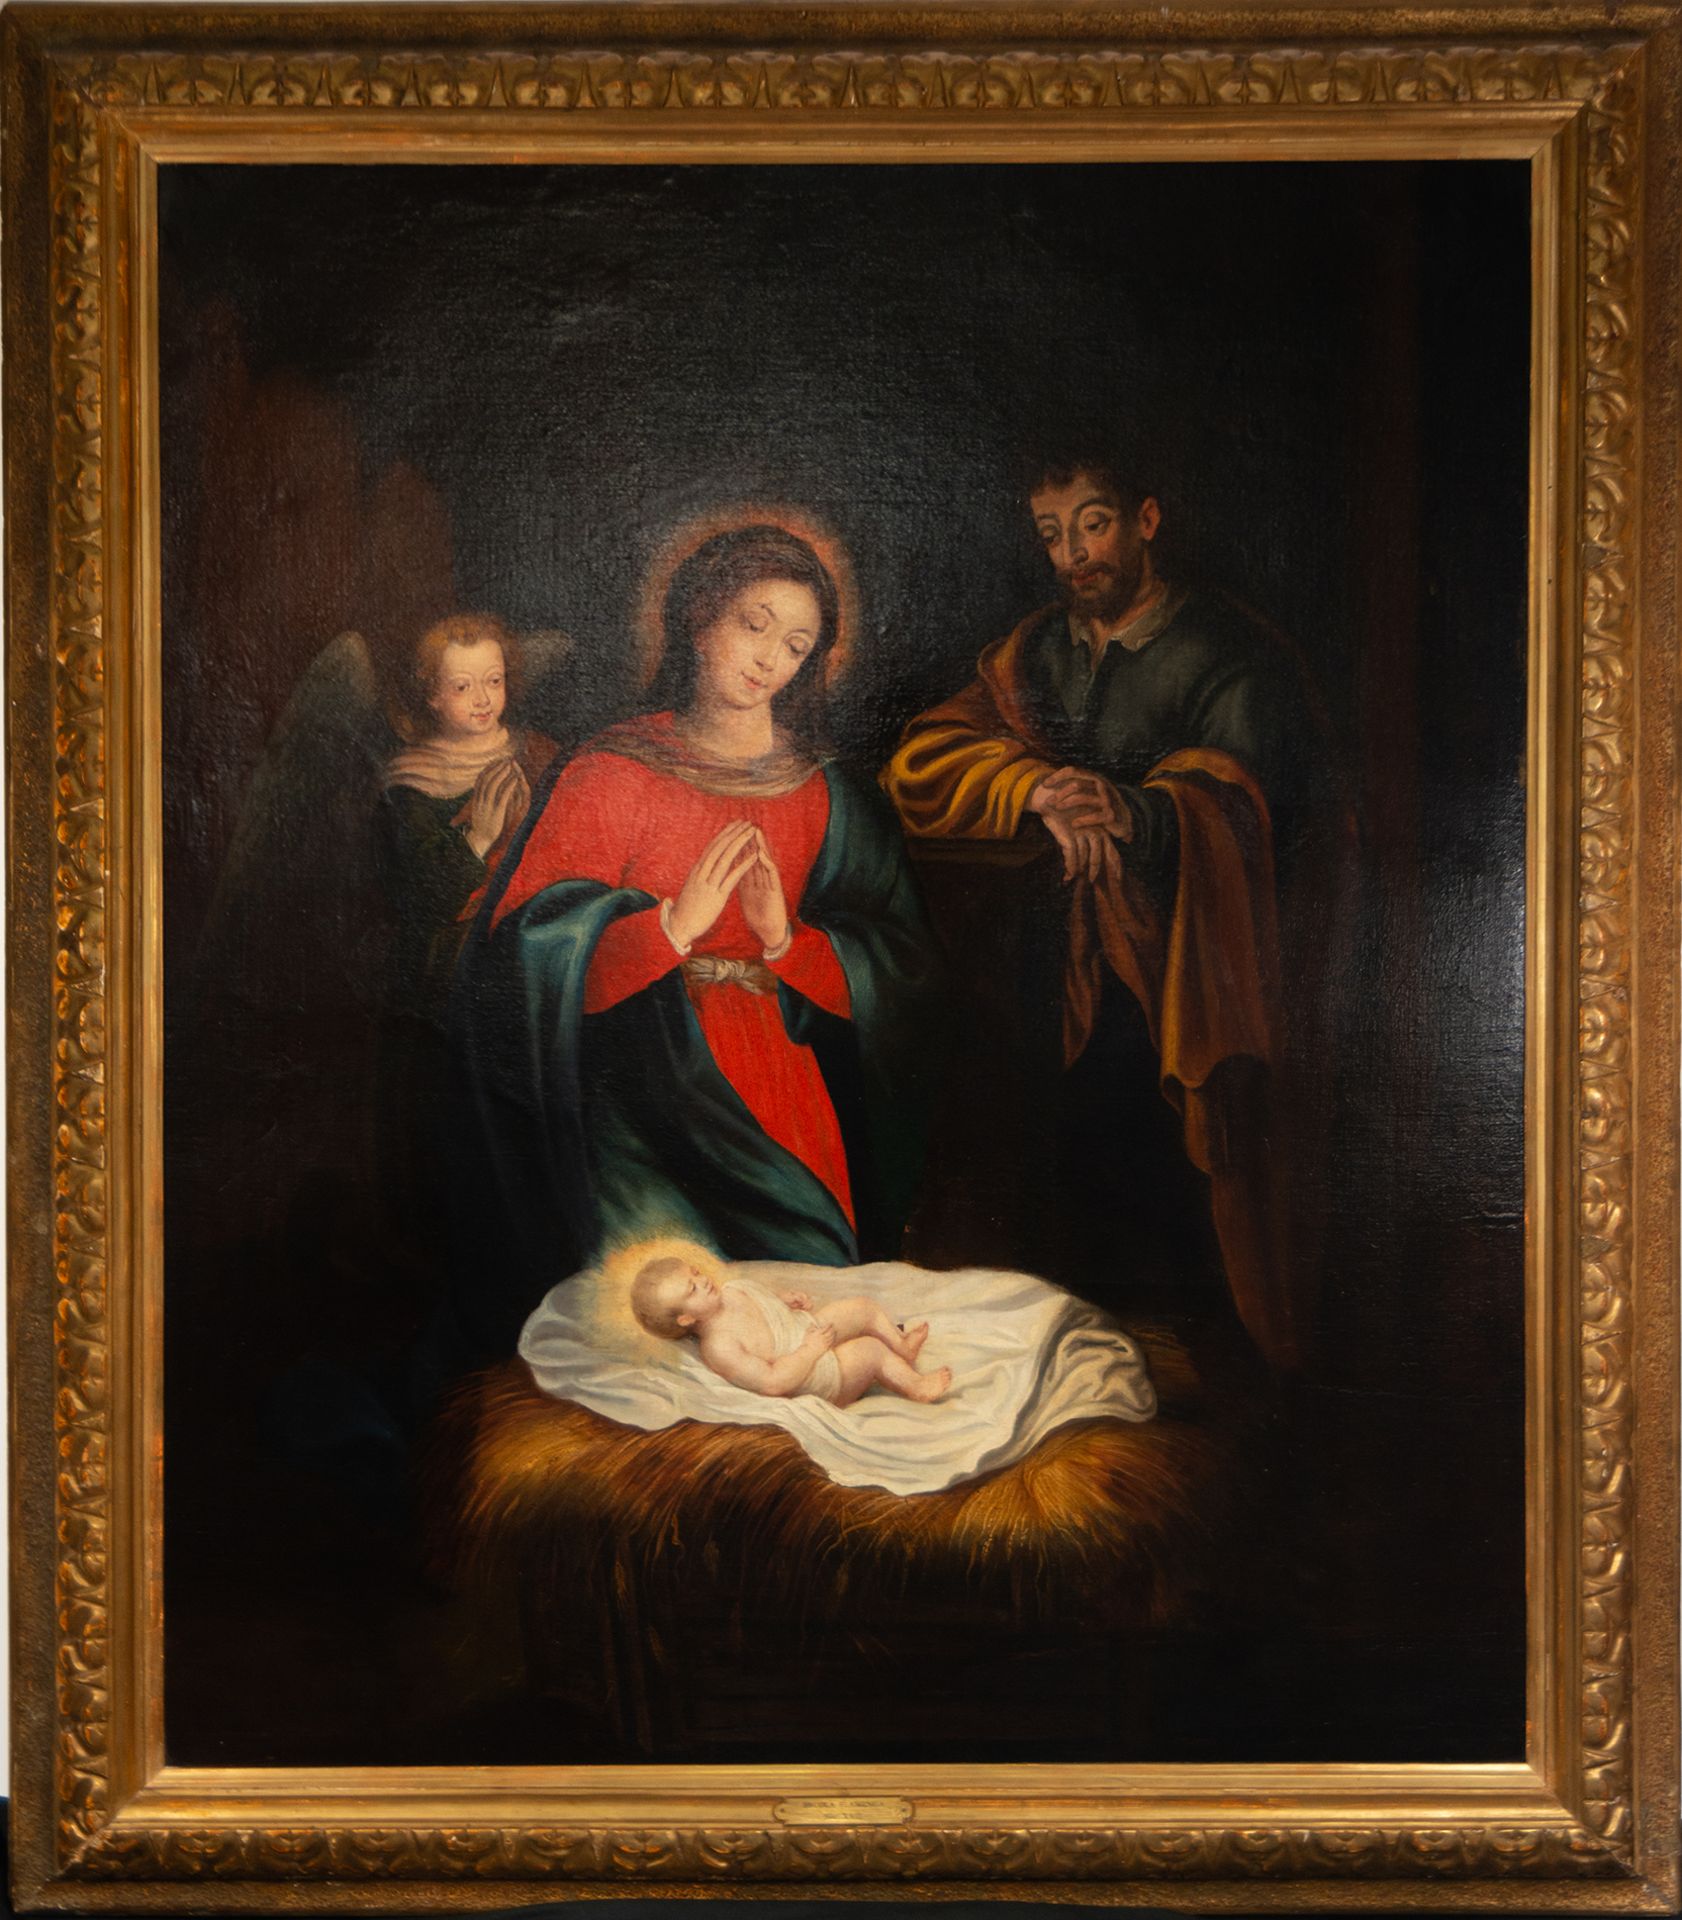 Holy Family with Angel, Sevillian or Portuguese school of the 17th century, circle of Josefa de Óbid